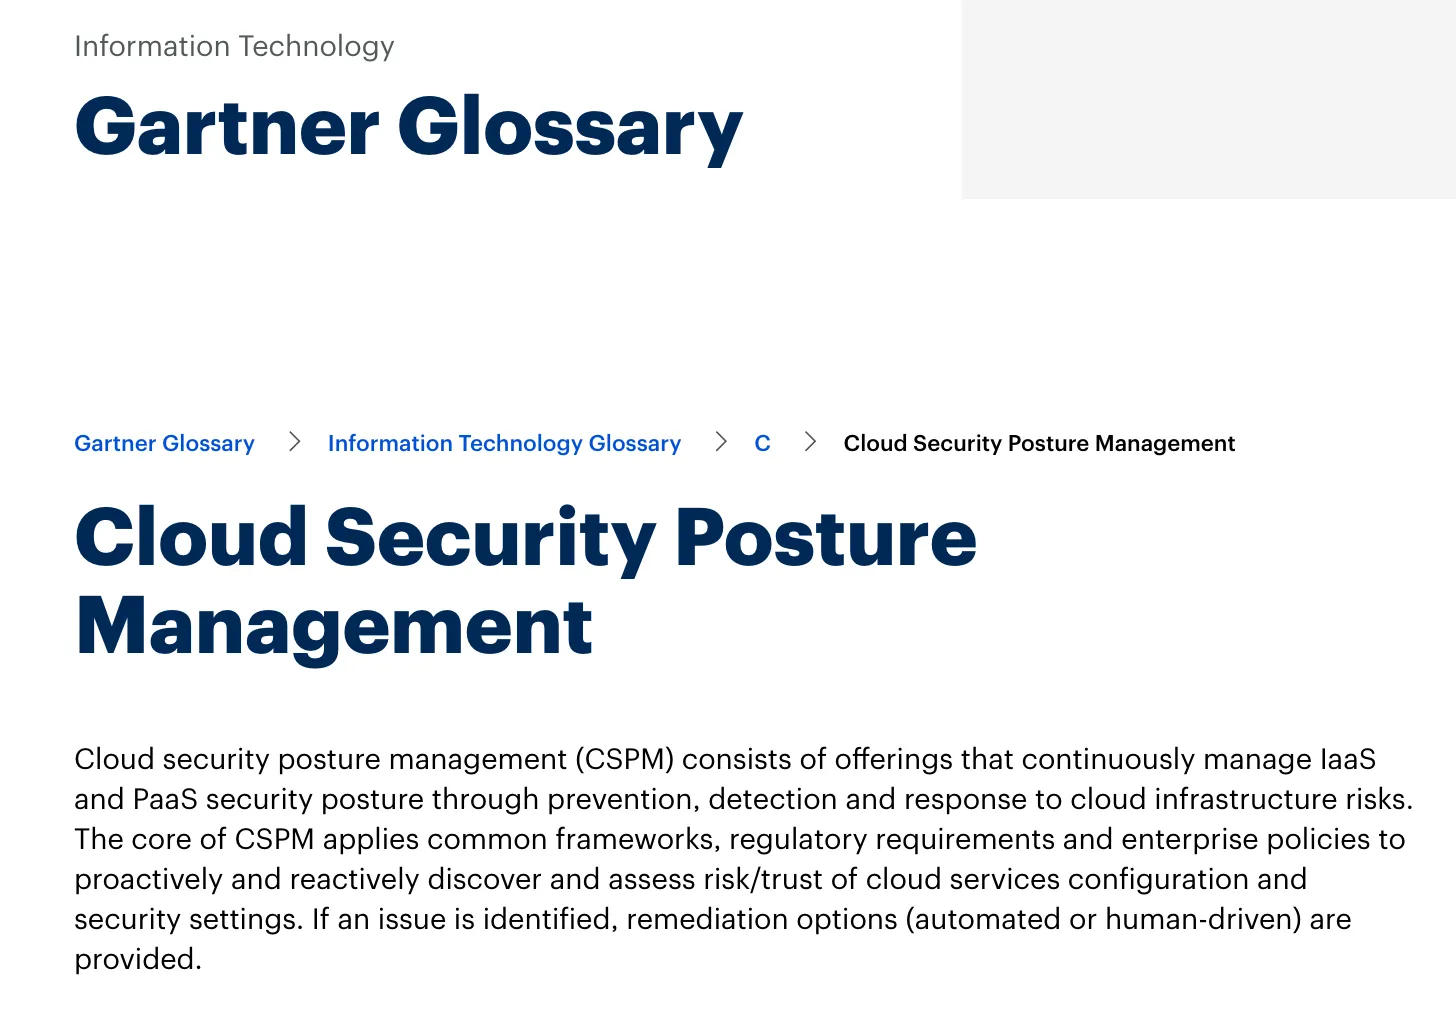 The Evolution of Cloud Security Posture Management